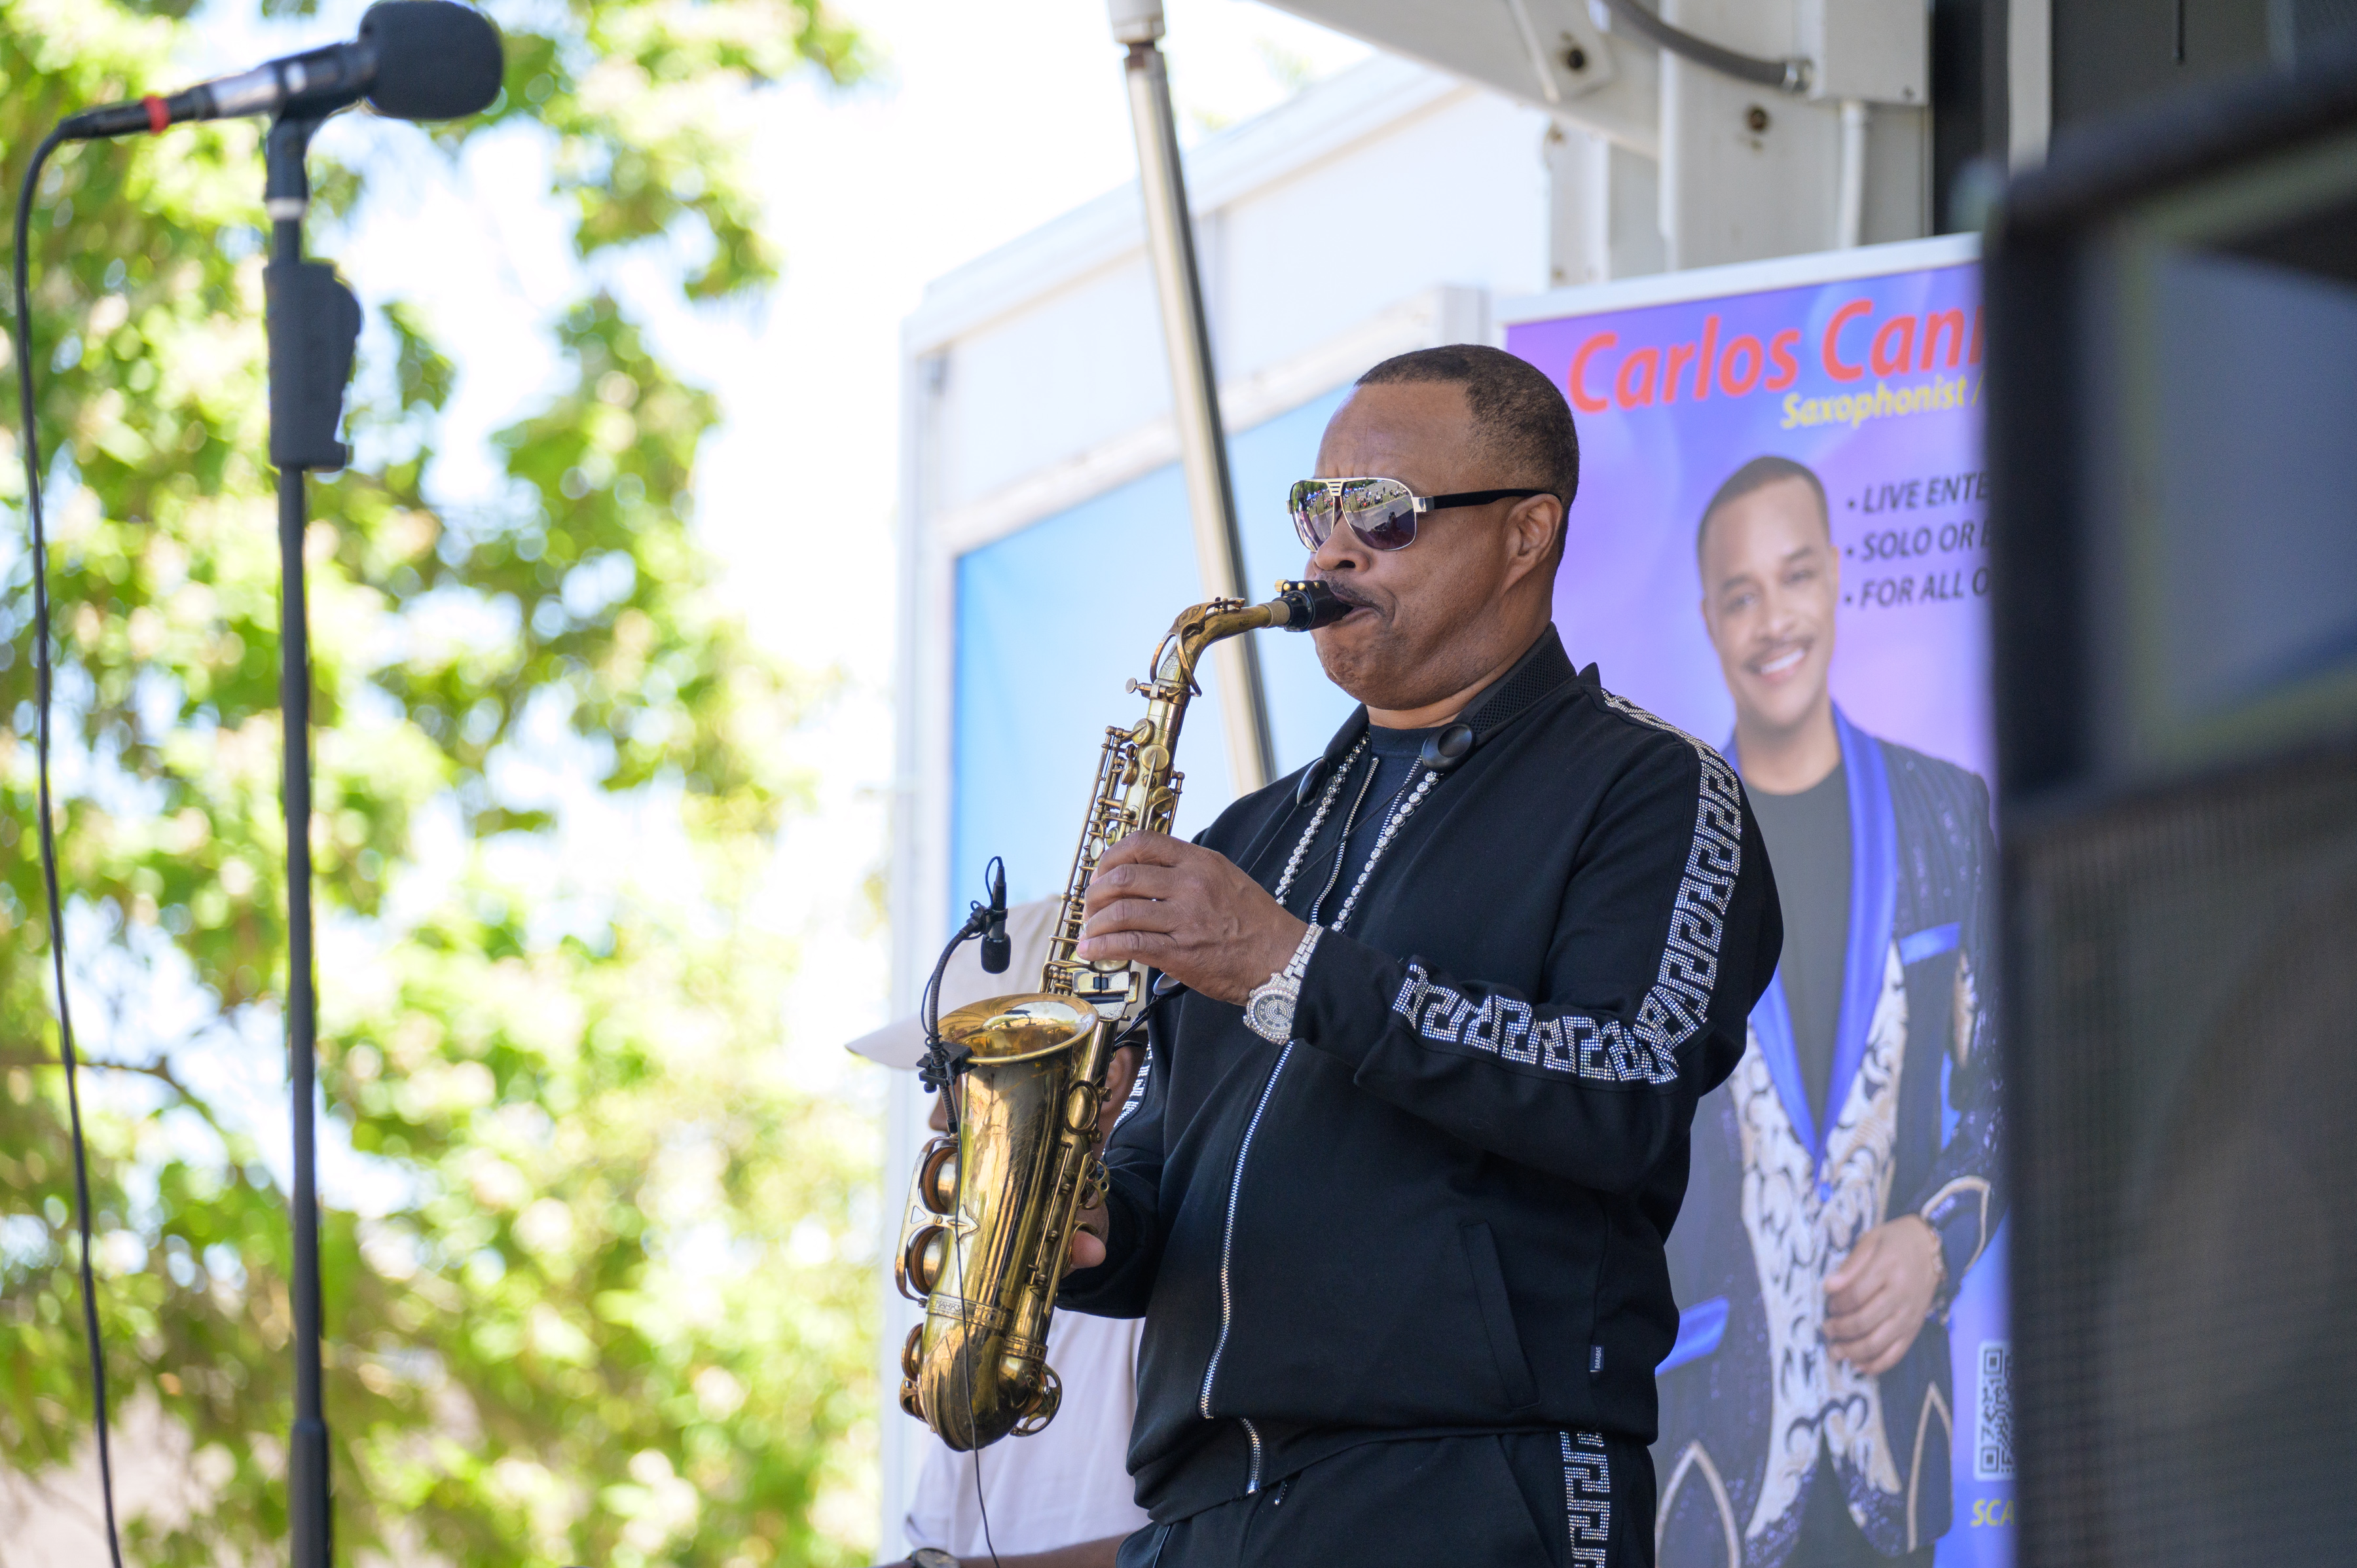 Carlos Canon performing on saxophone on outdoor stage